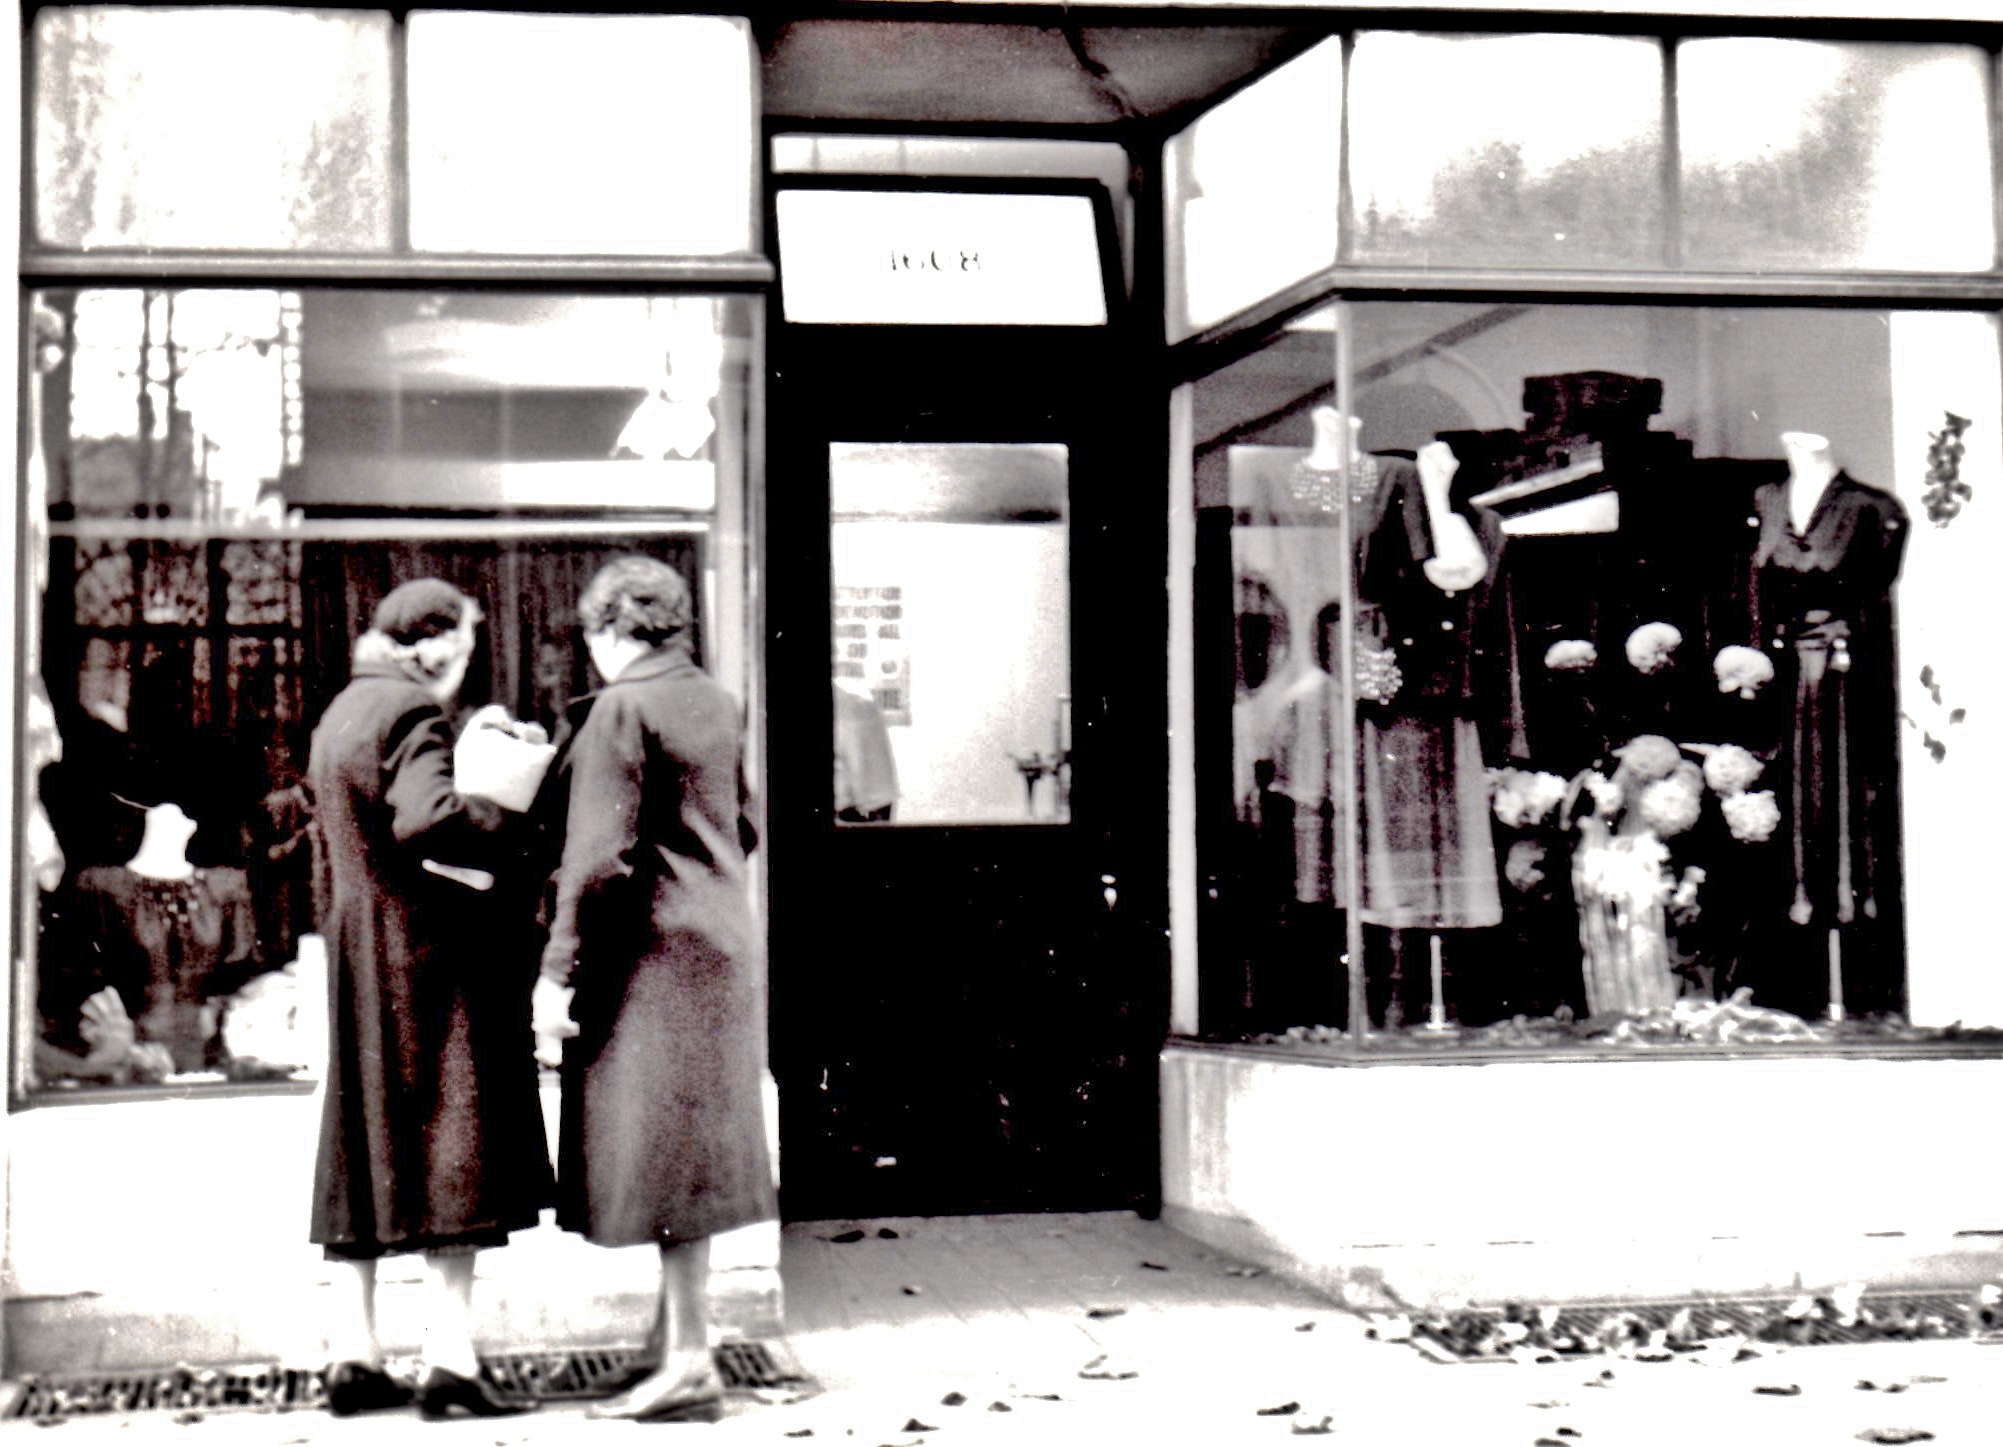 One of the many shops, a sisters Dress Shop, in the building